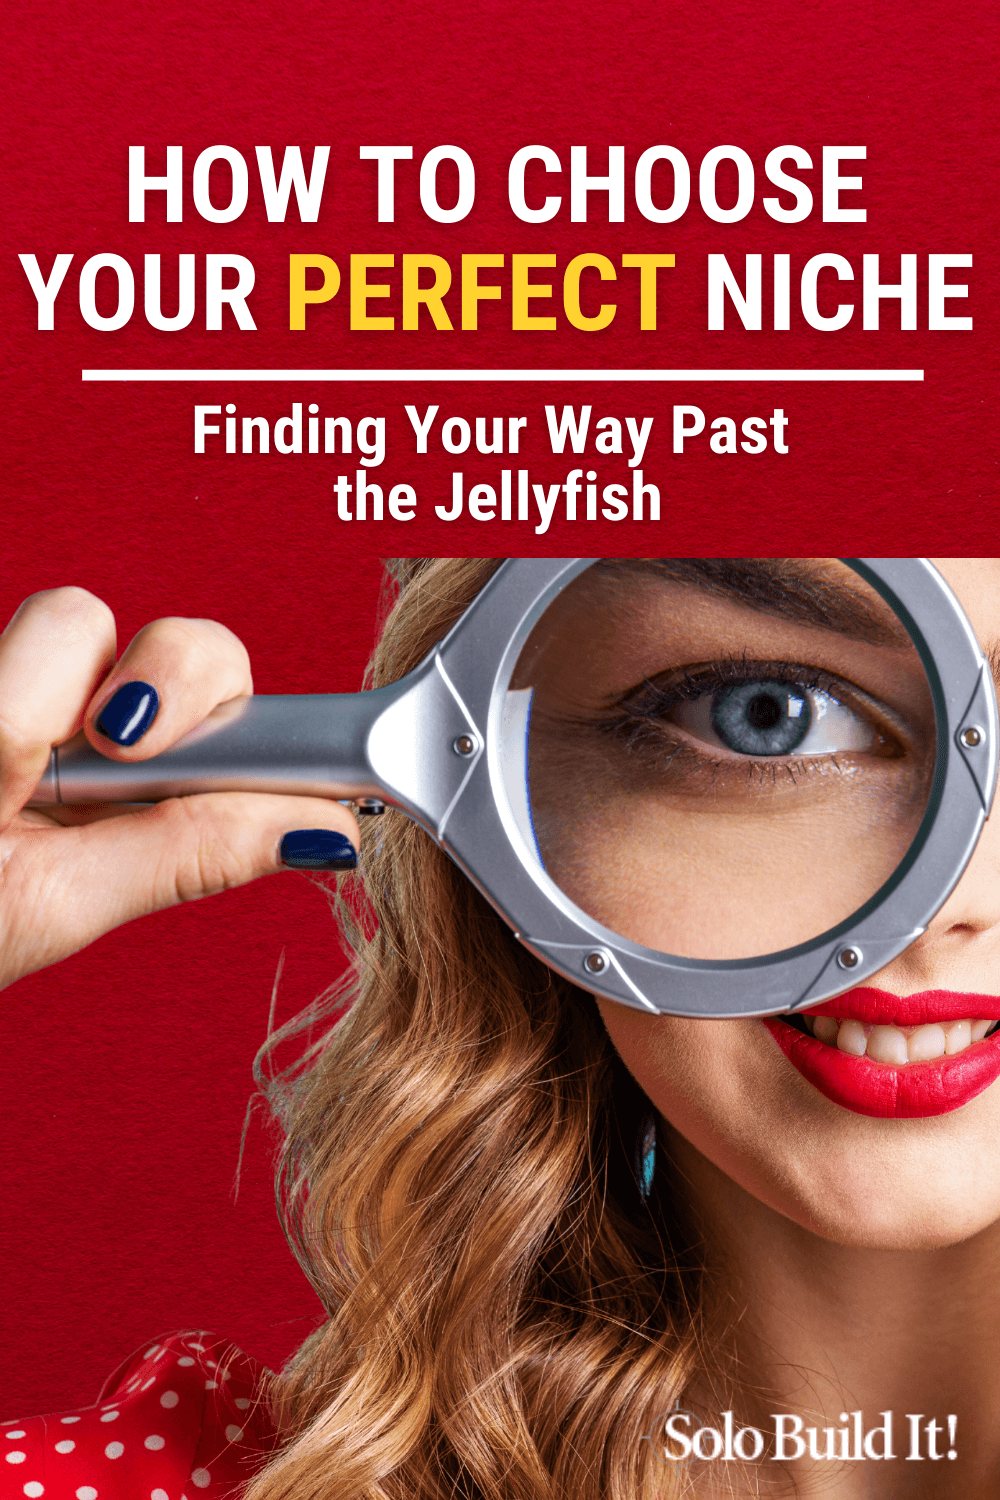 How to Choose Your Perfect Niche in 3 Simple Steps